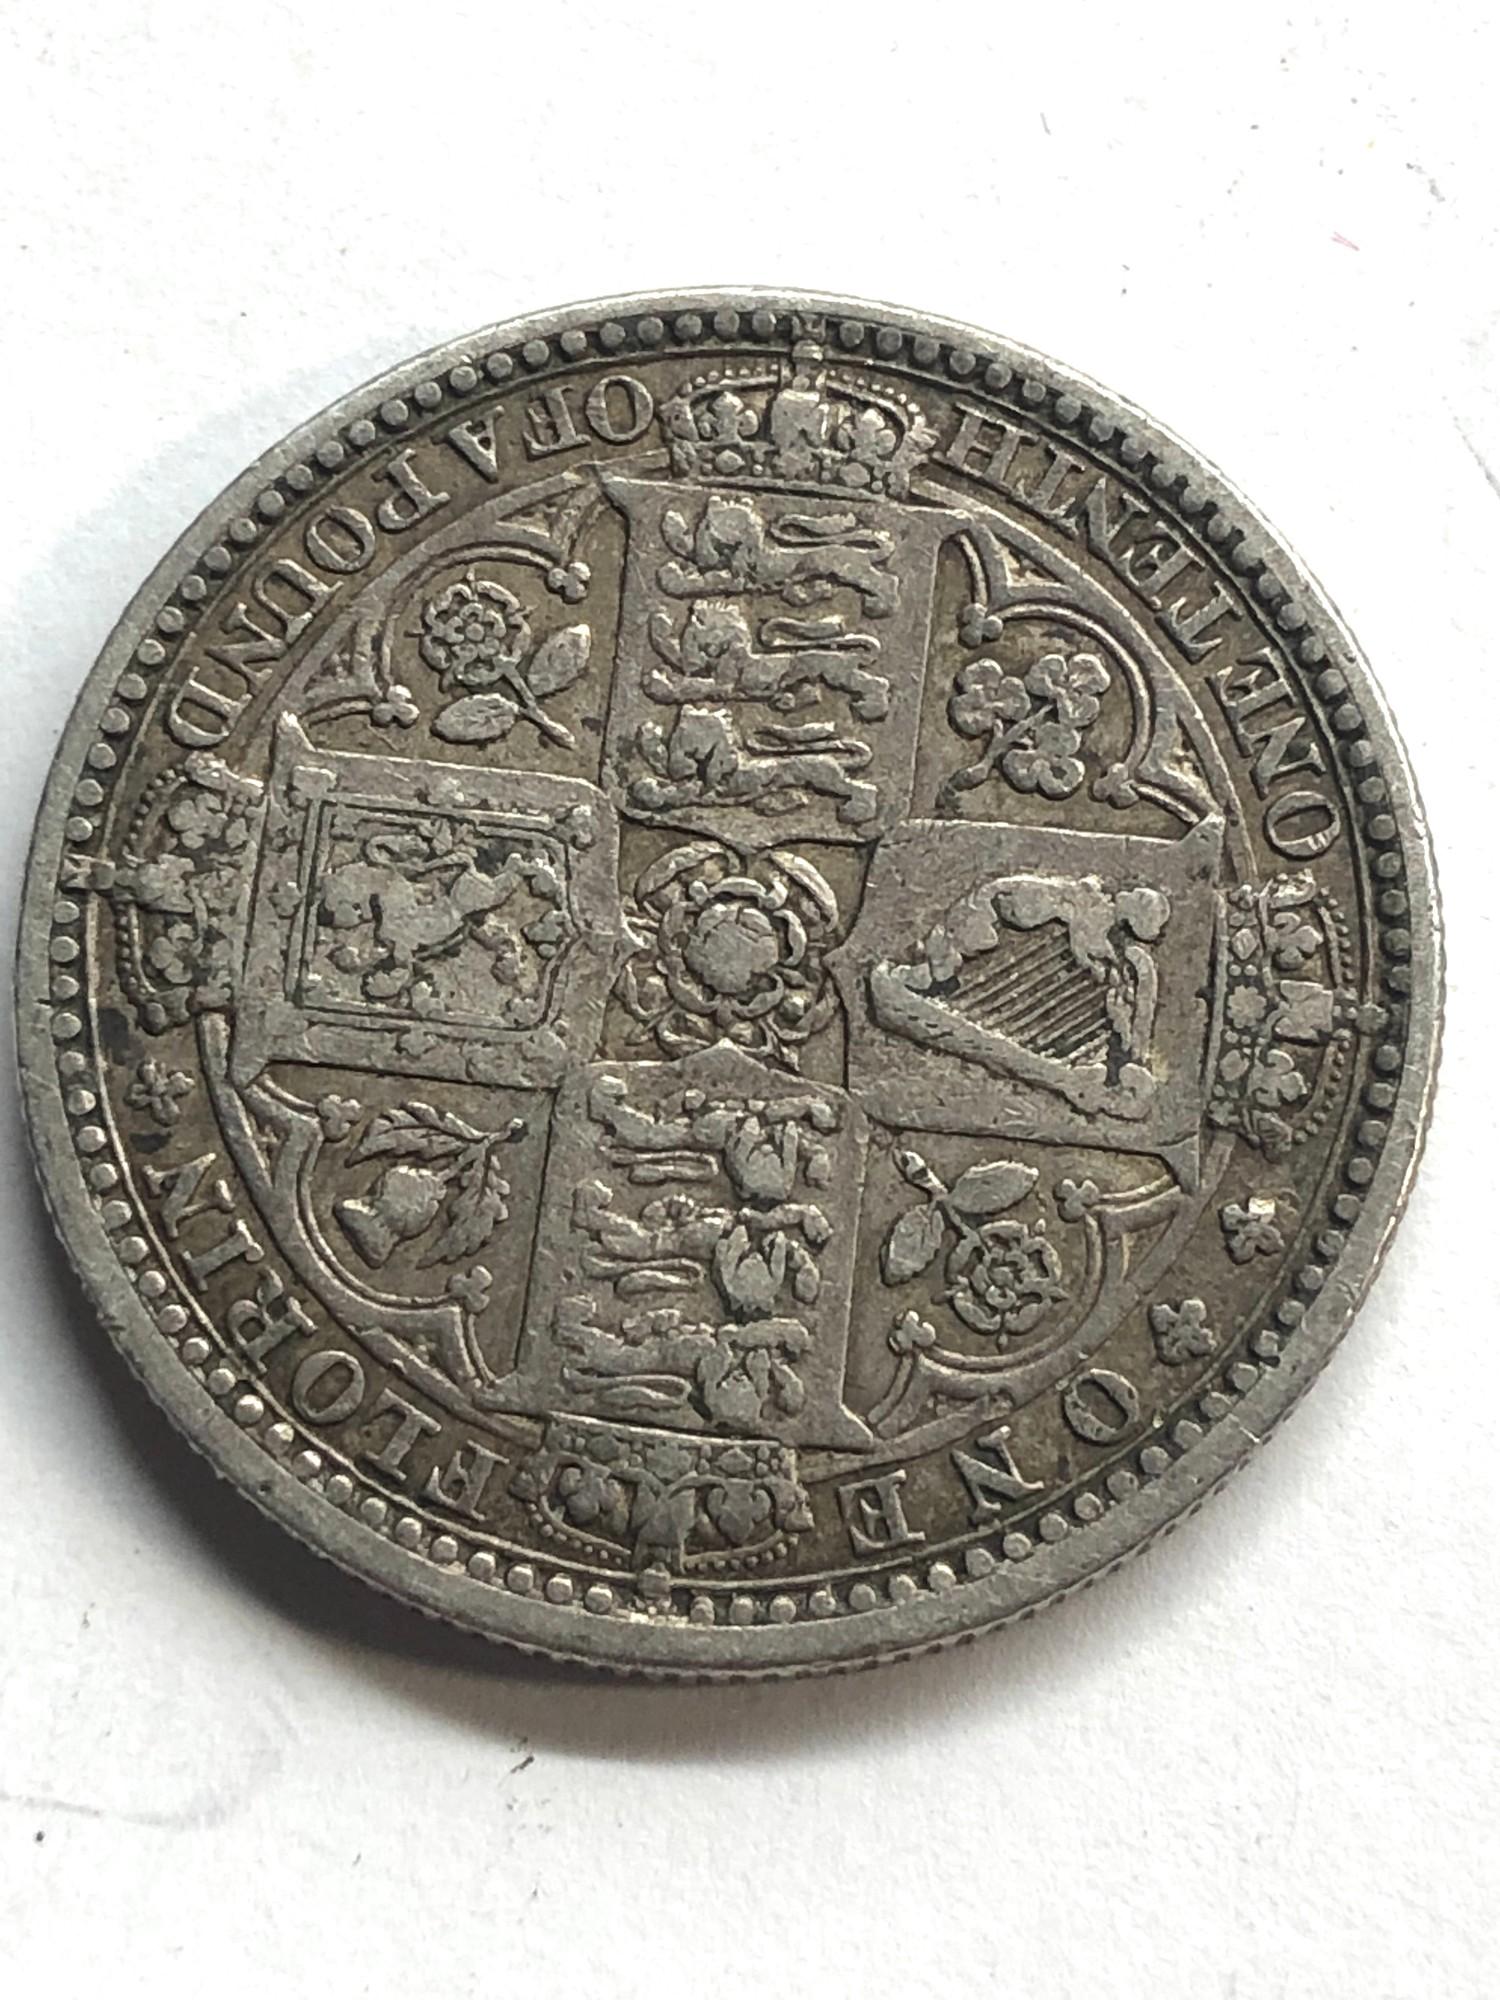 1849 Victorian gothic florin - Image 2 of 2